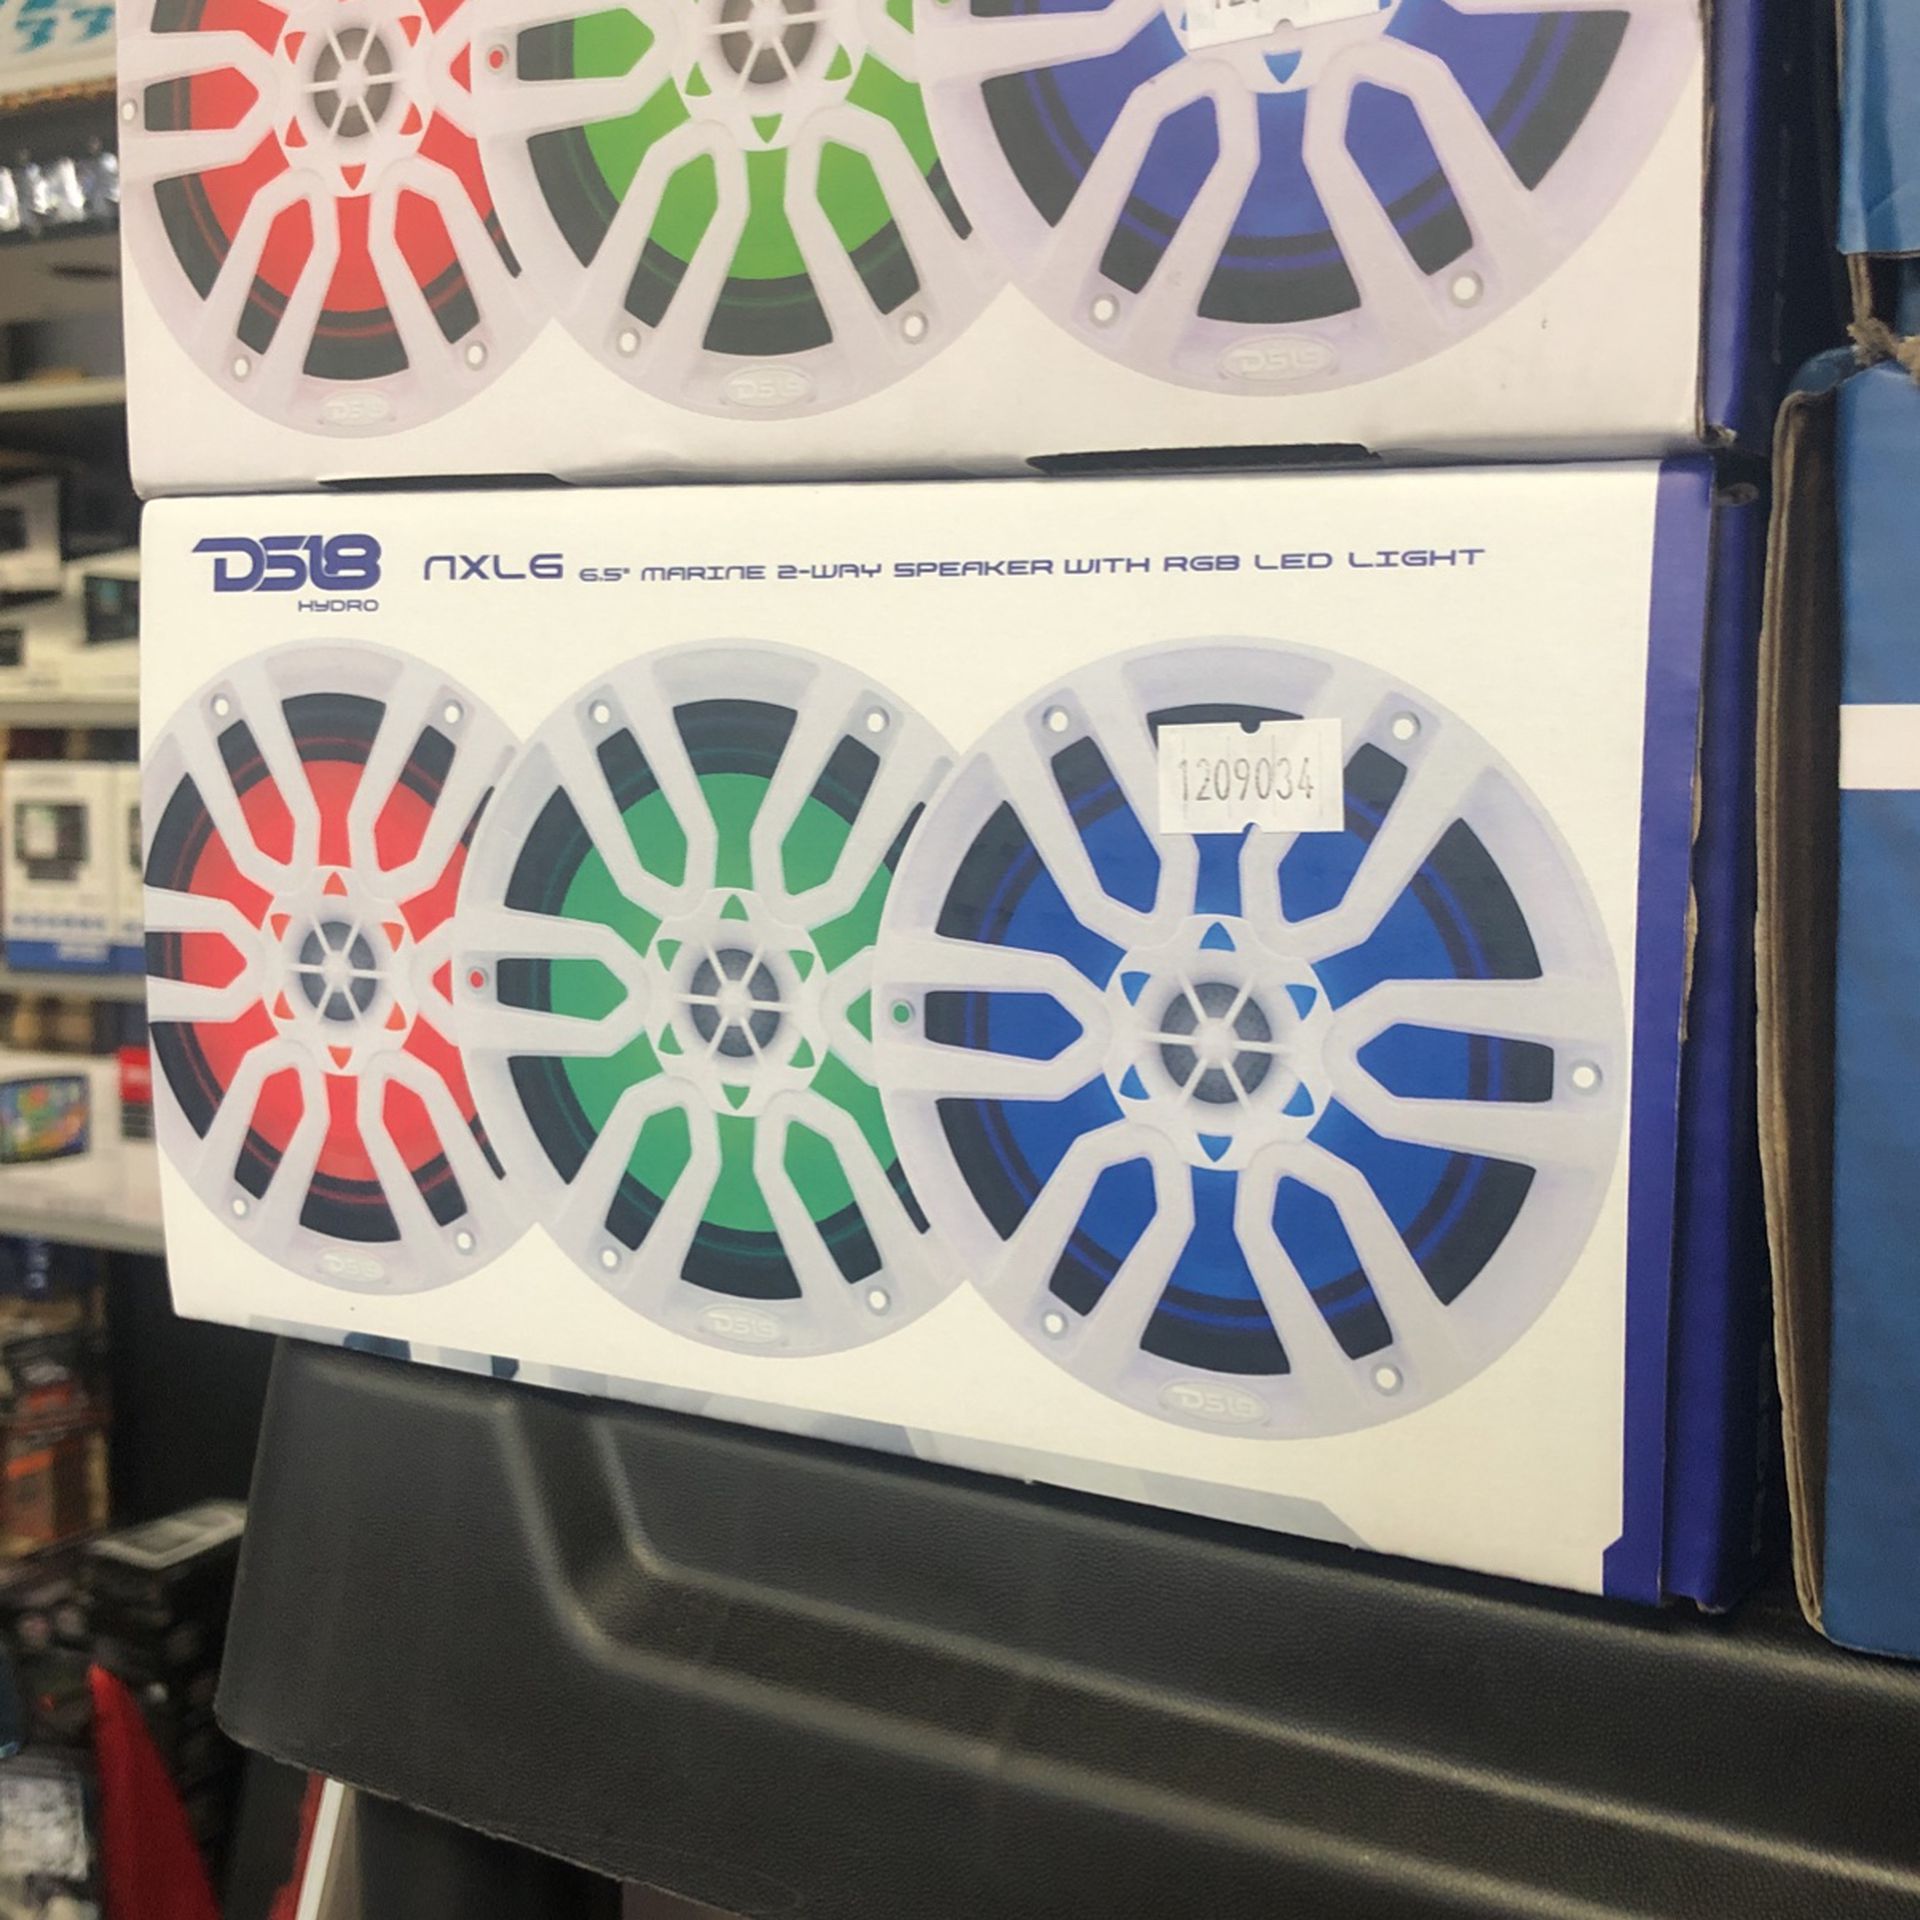 Ds18 Nxl6 Marine Speakers On Sale For 129.98